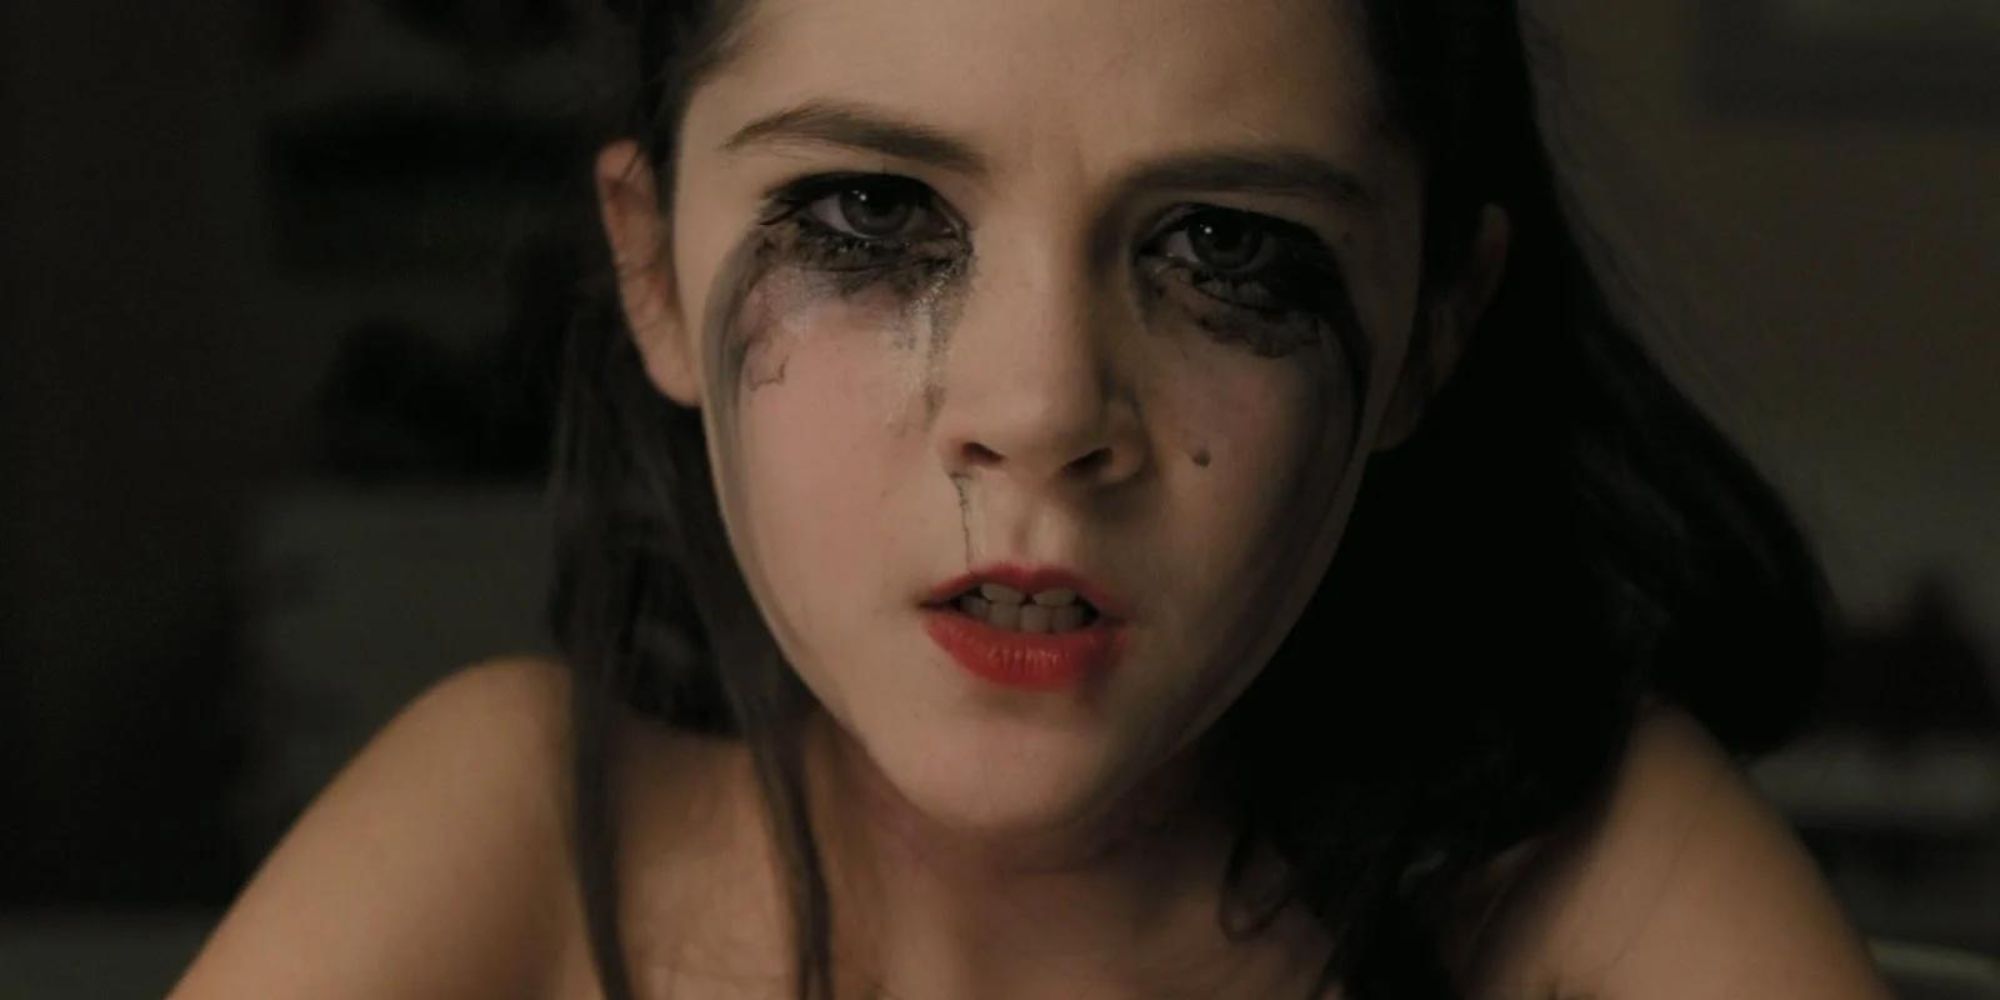 Esther crying mascara in Orphan (2009)